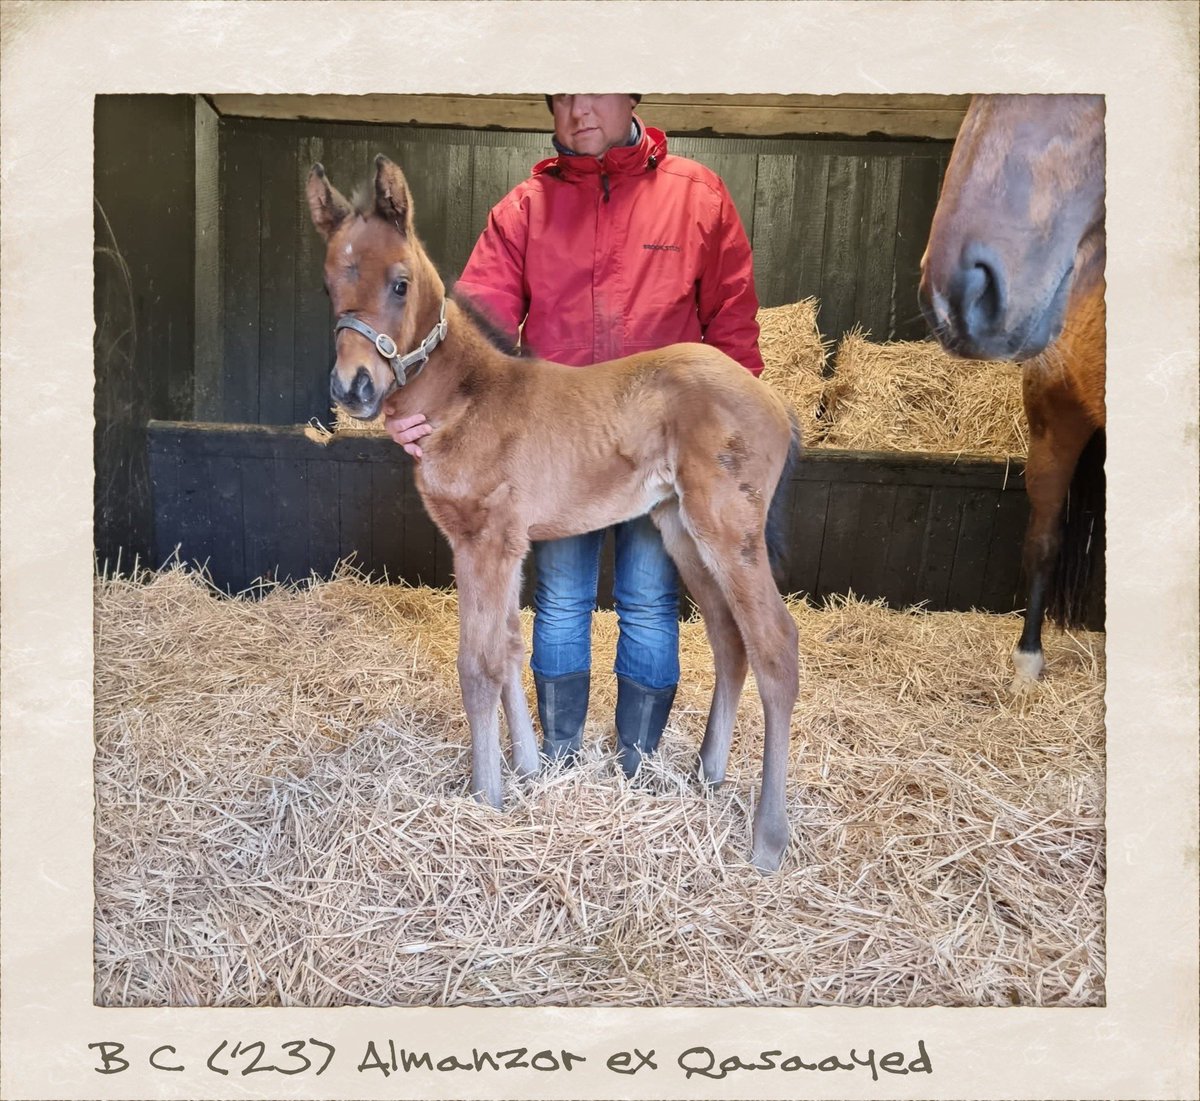 My first homebred foal for my Broodmare Qasaayed a Colt by Almanzor ❤️ over the moon ❤️